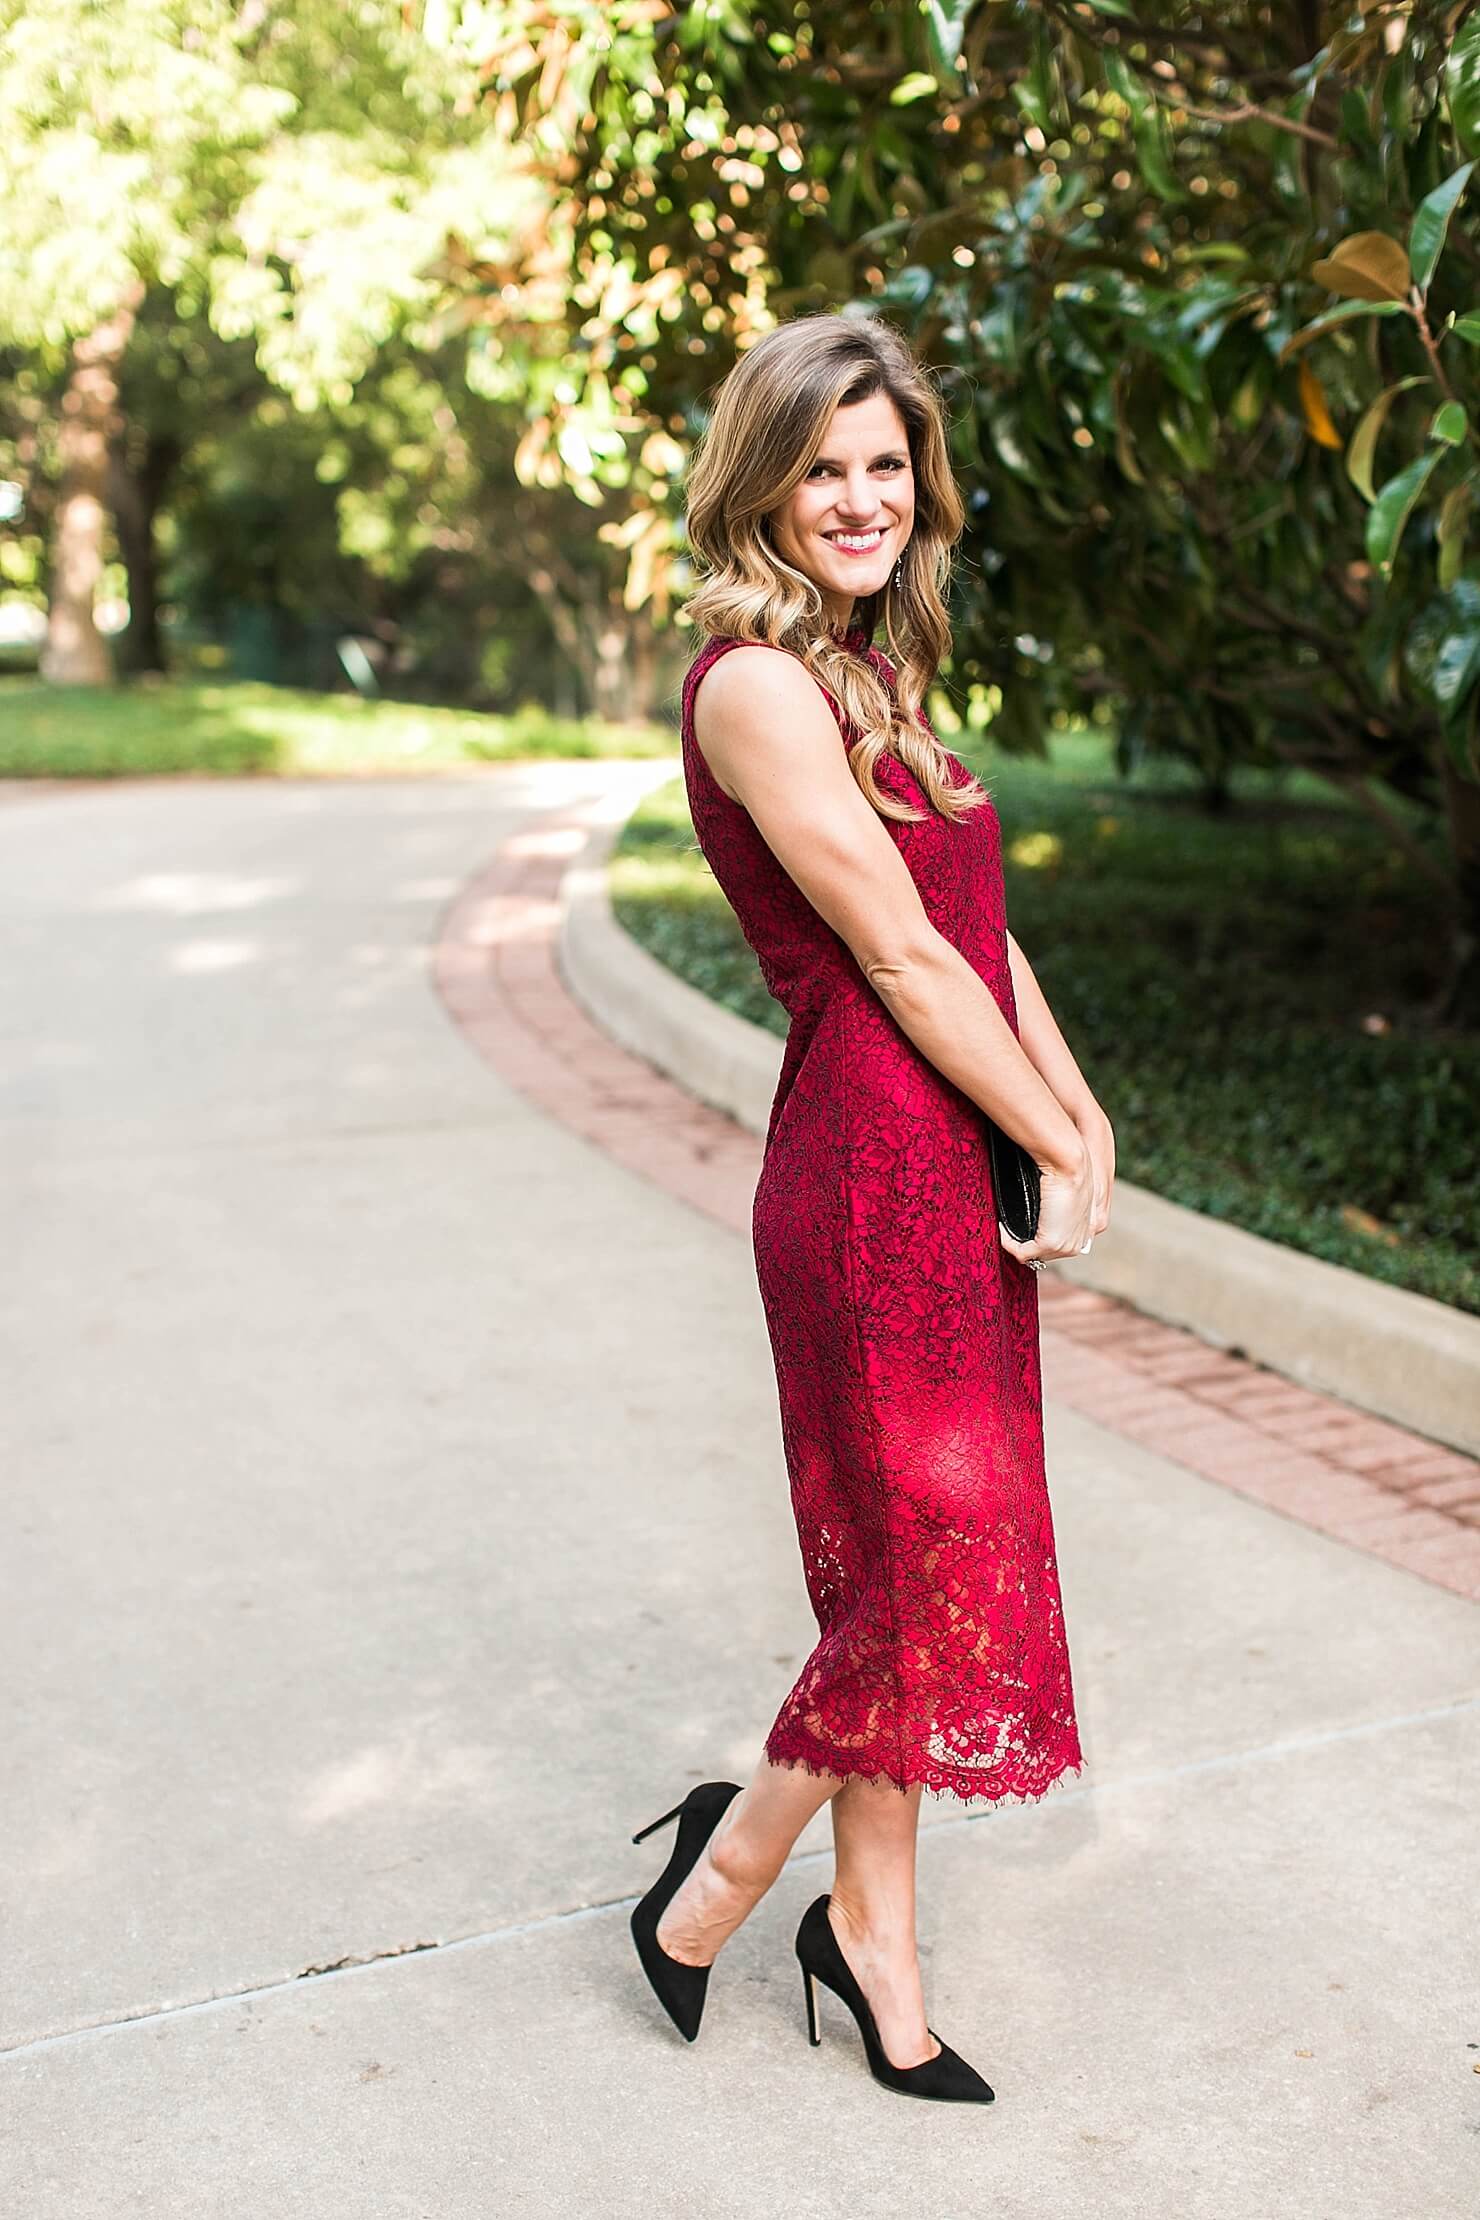 What to wear to a fall wedding - Dress colors, prints, textures & Shoes!